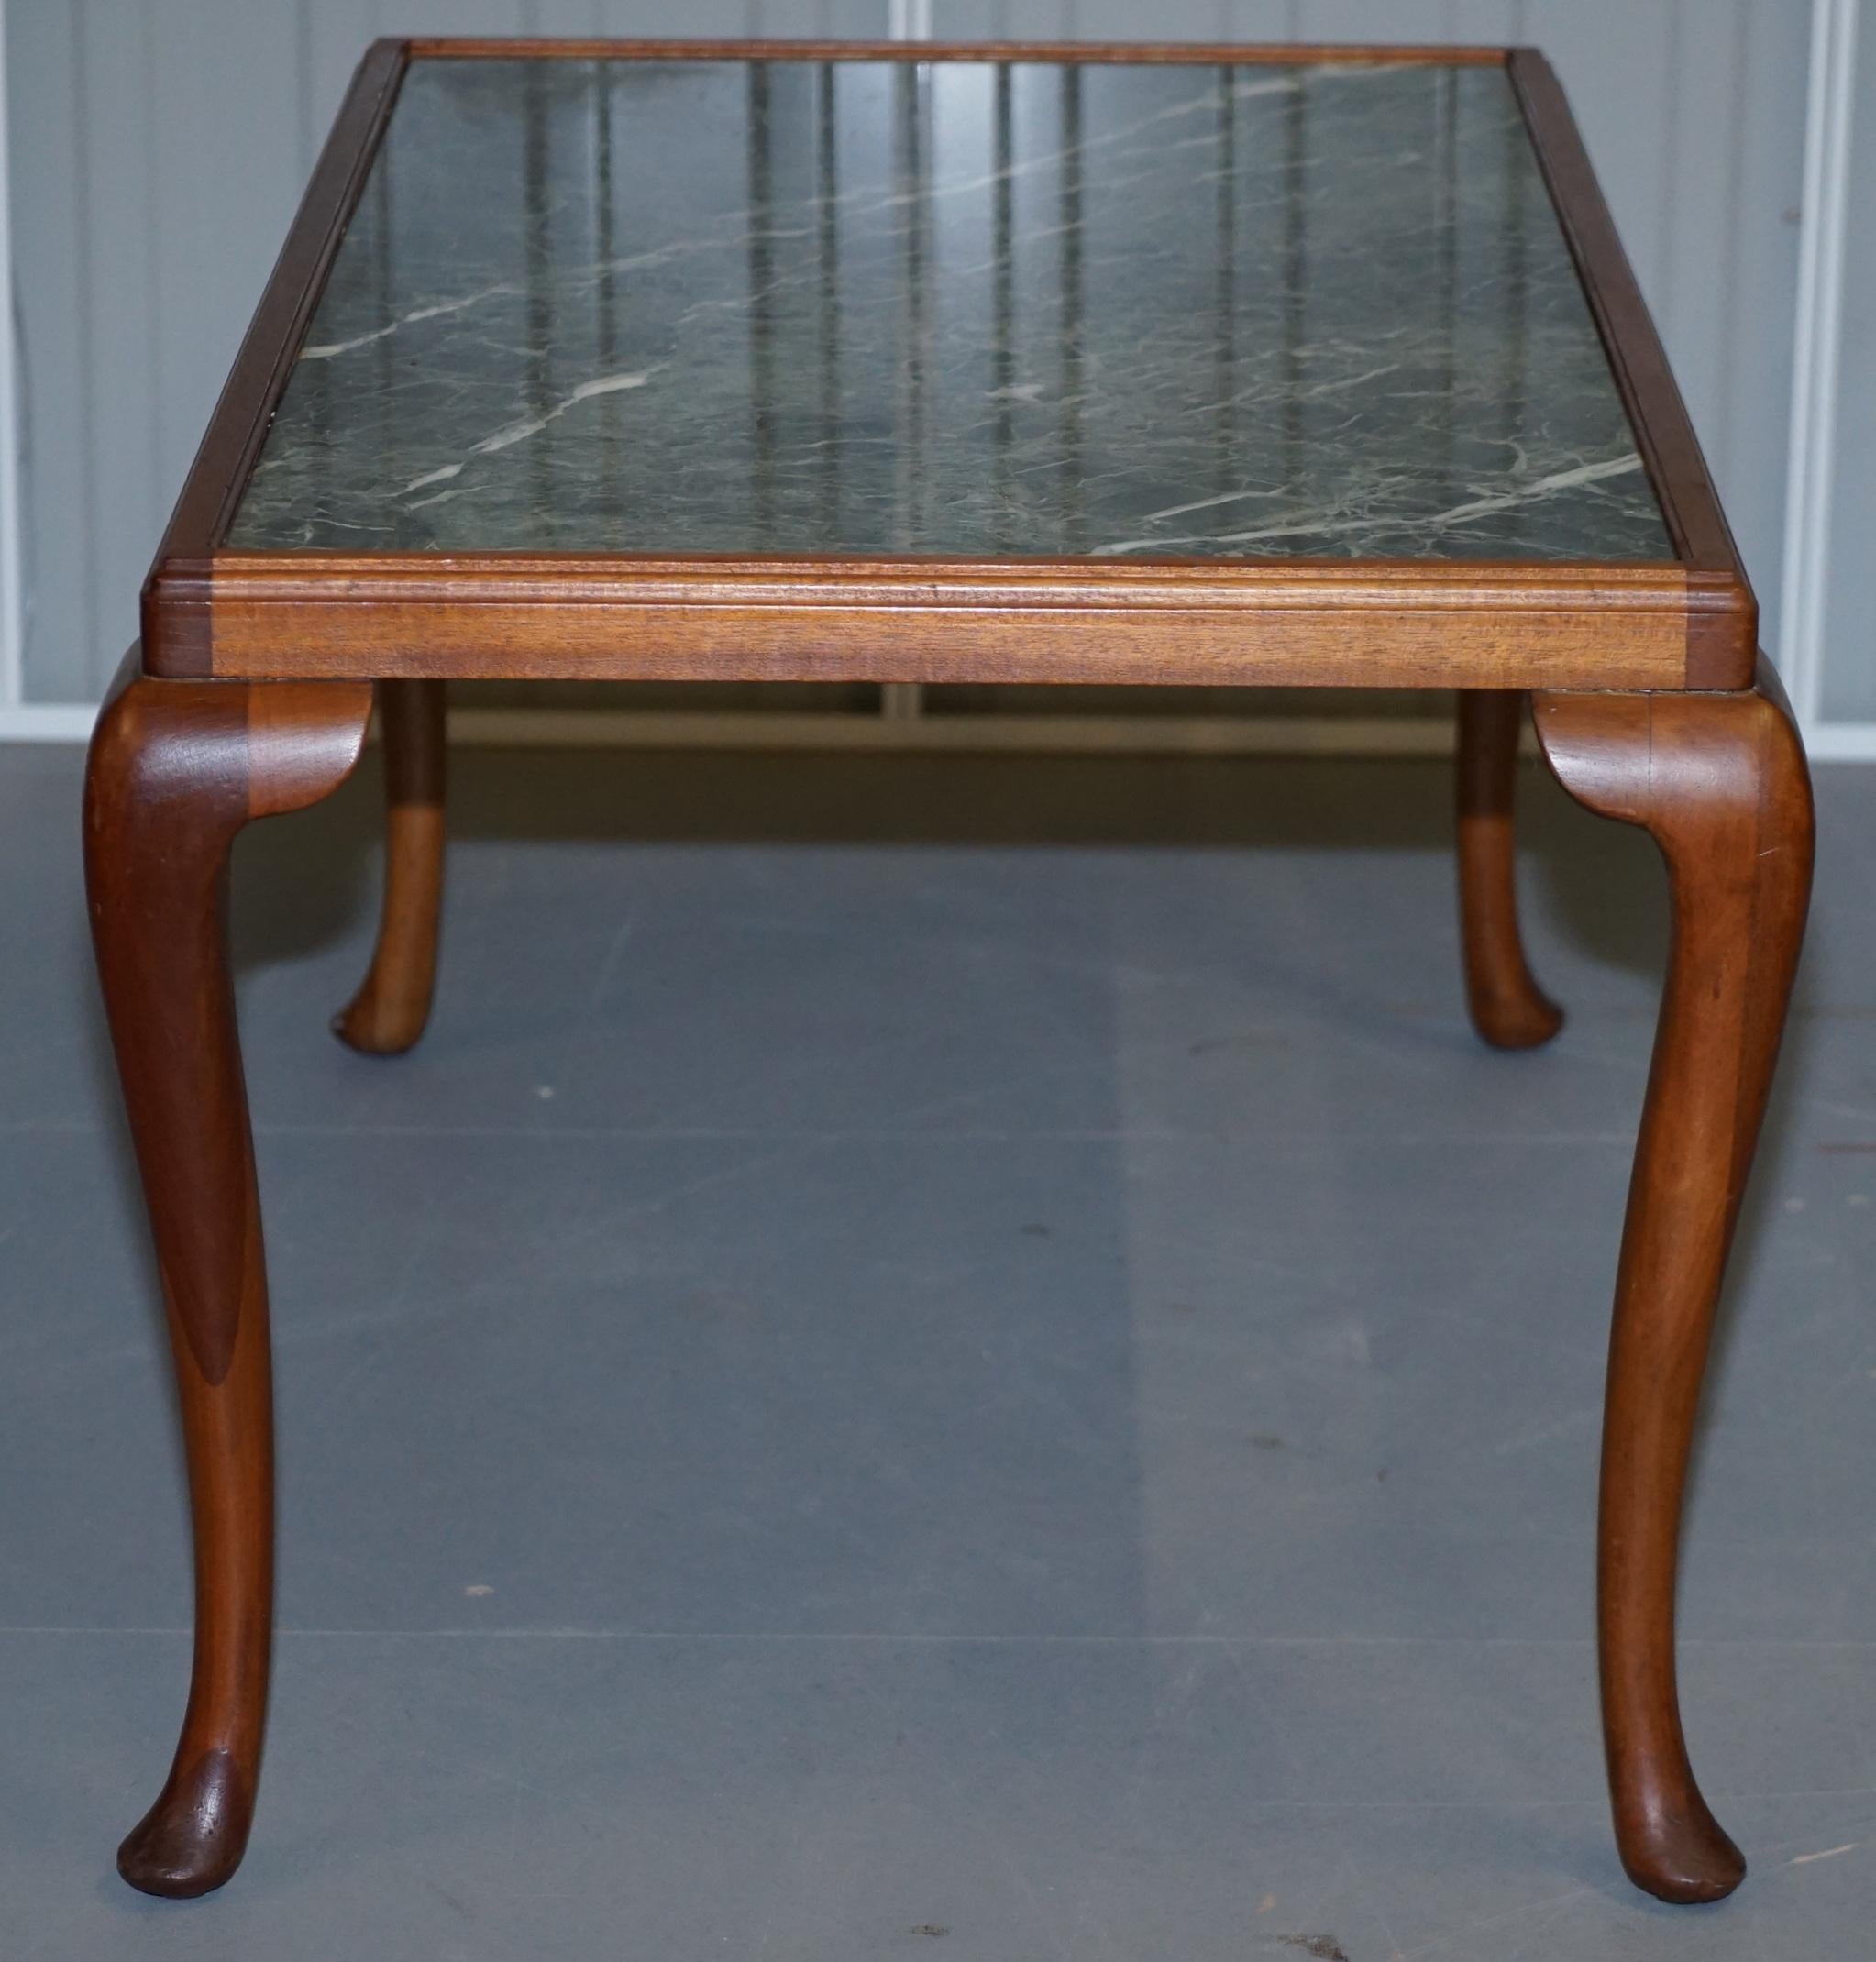 Lovely Vintage Walnut Framed with Solid Marble-Top Coffee or Cocktail Table 1